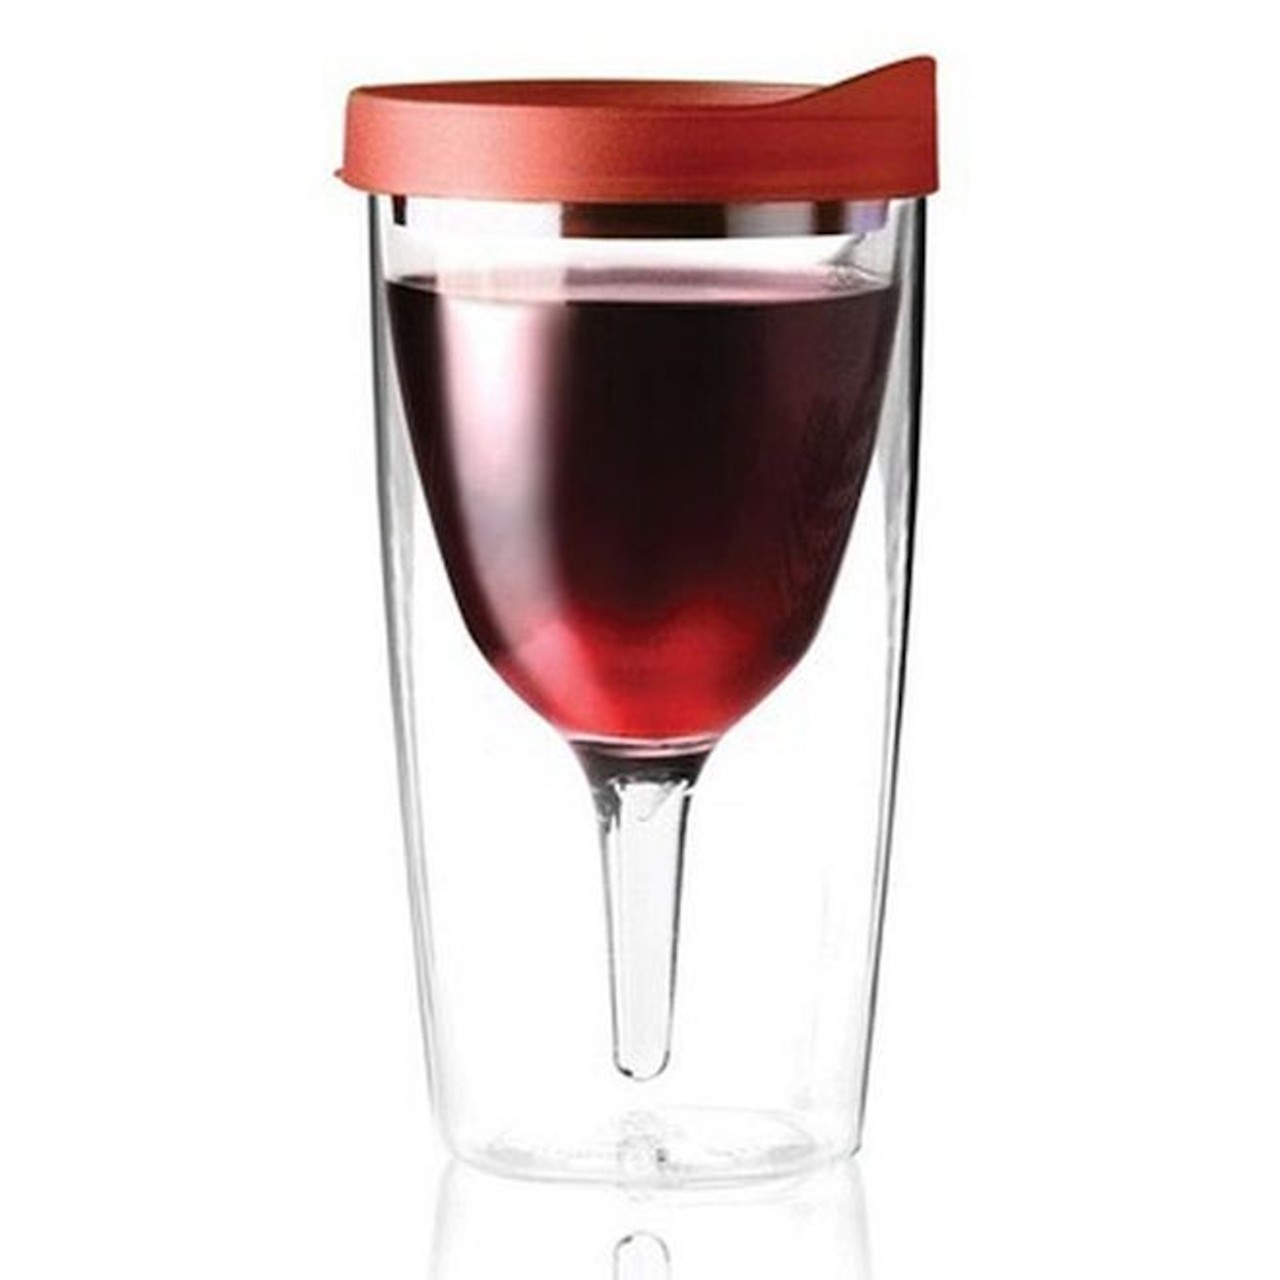 A soppy-cup wine glass.